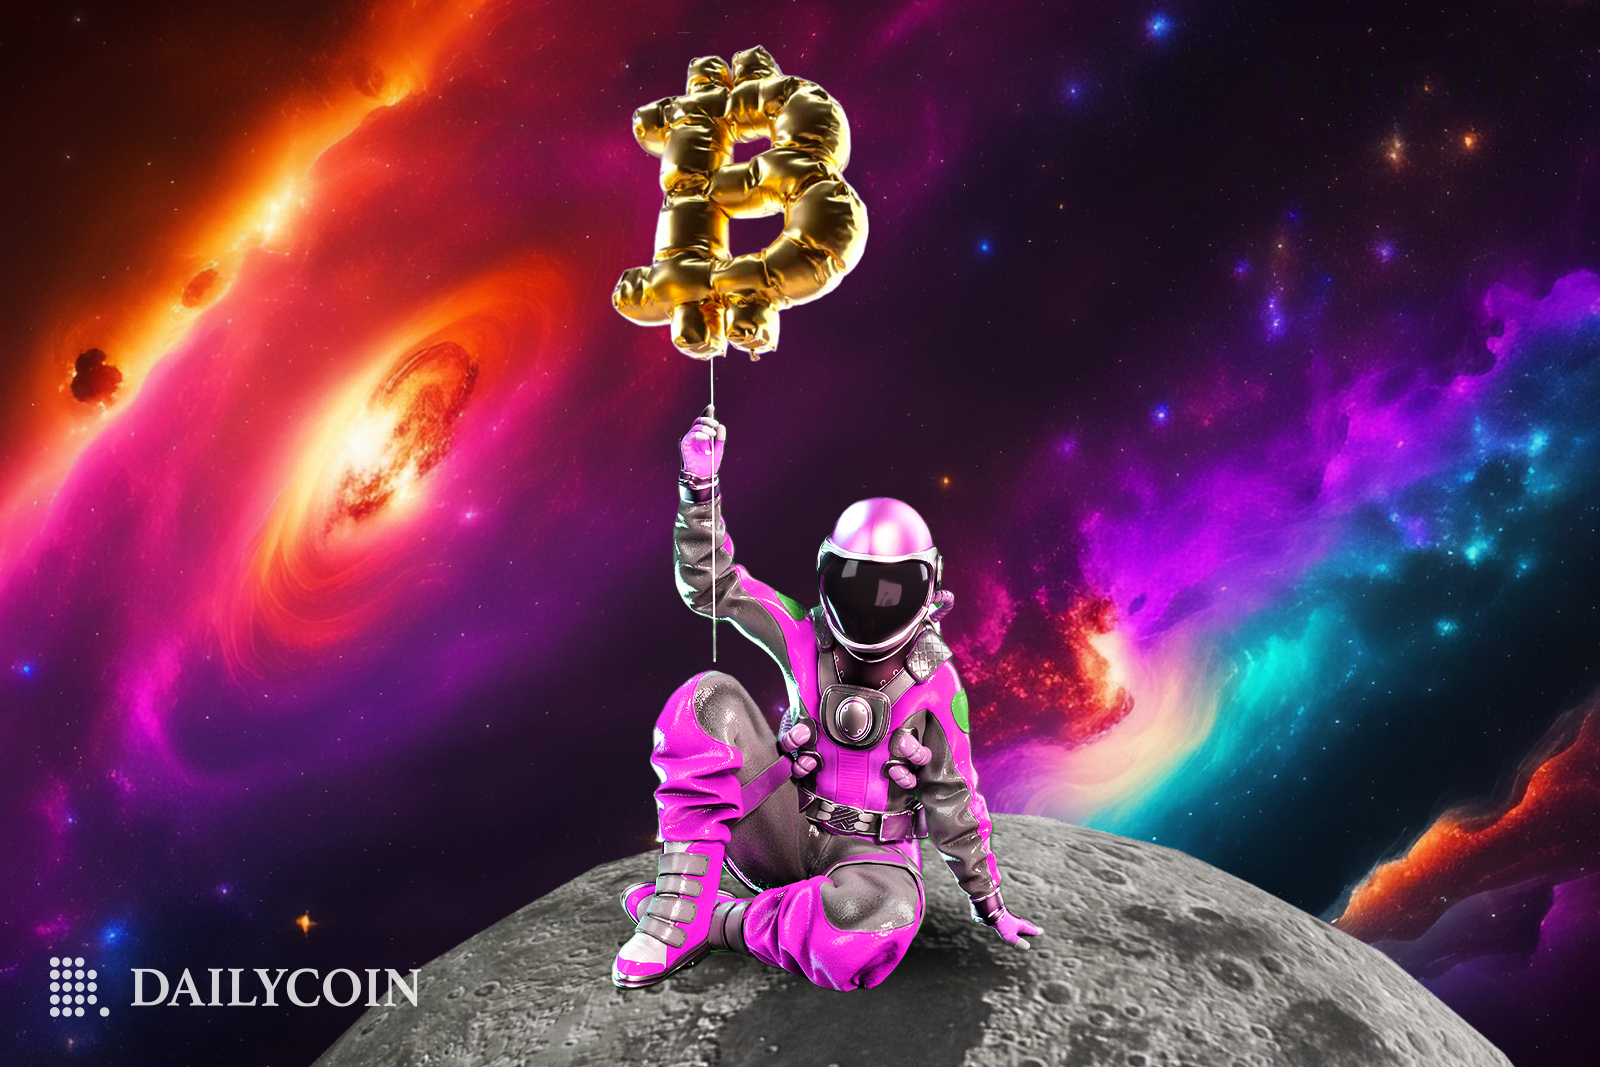 An astronaut in a pink suite sitting on the moon with a Bitcoin (BTC) balloon